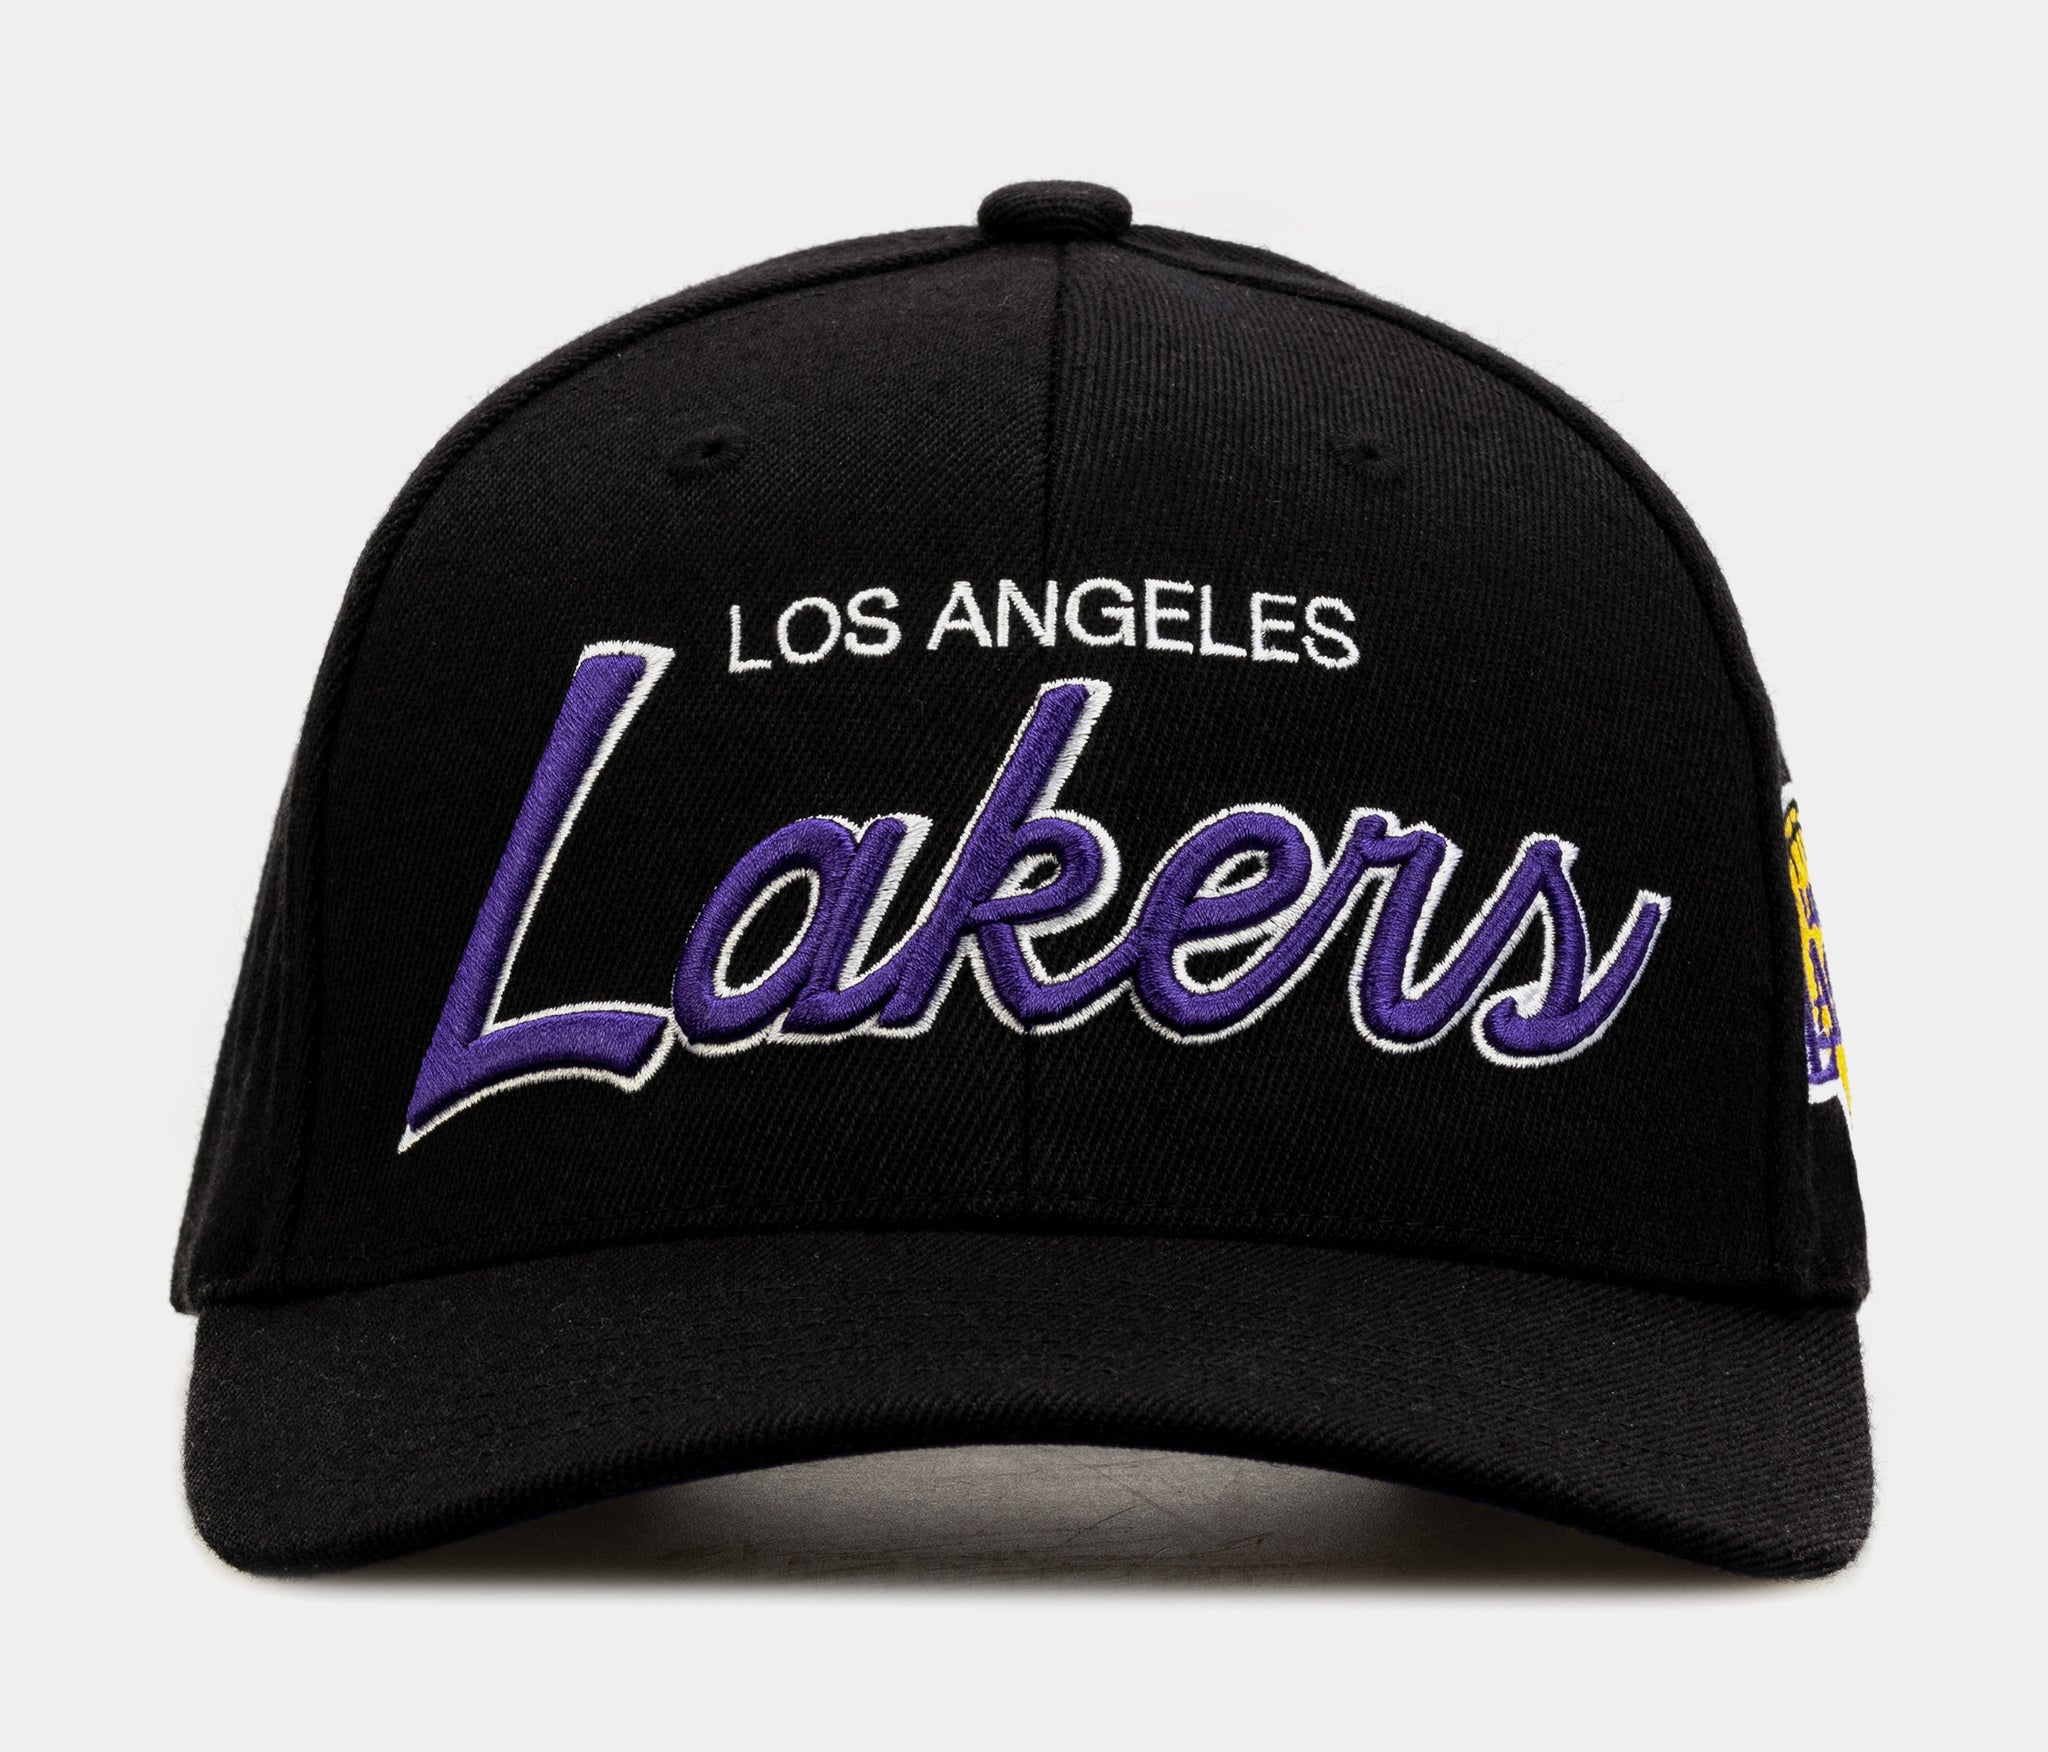 Mitchell and Ness Los Angeles Laker Snapback Black